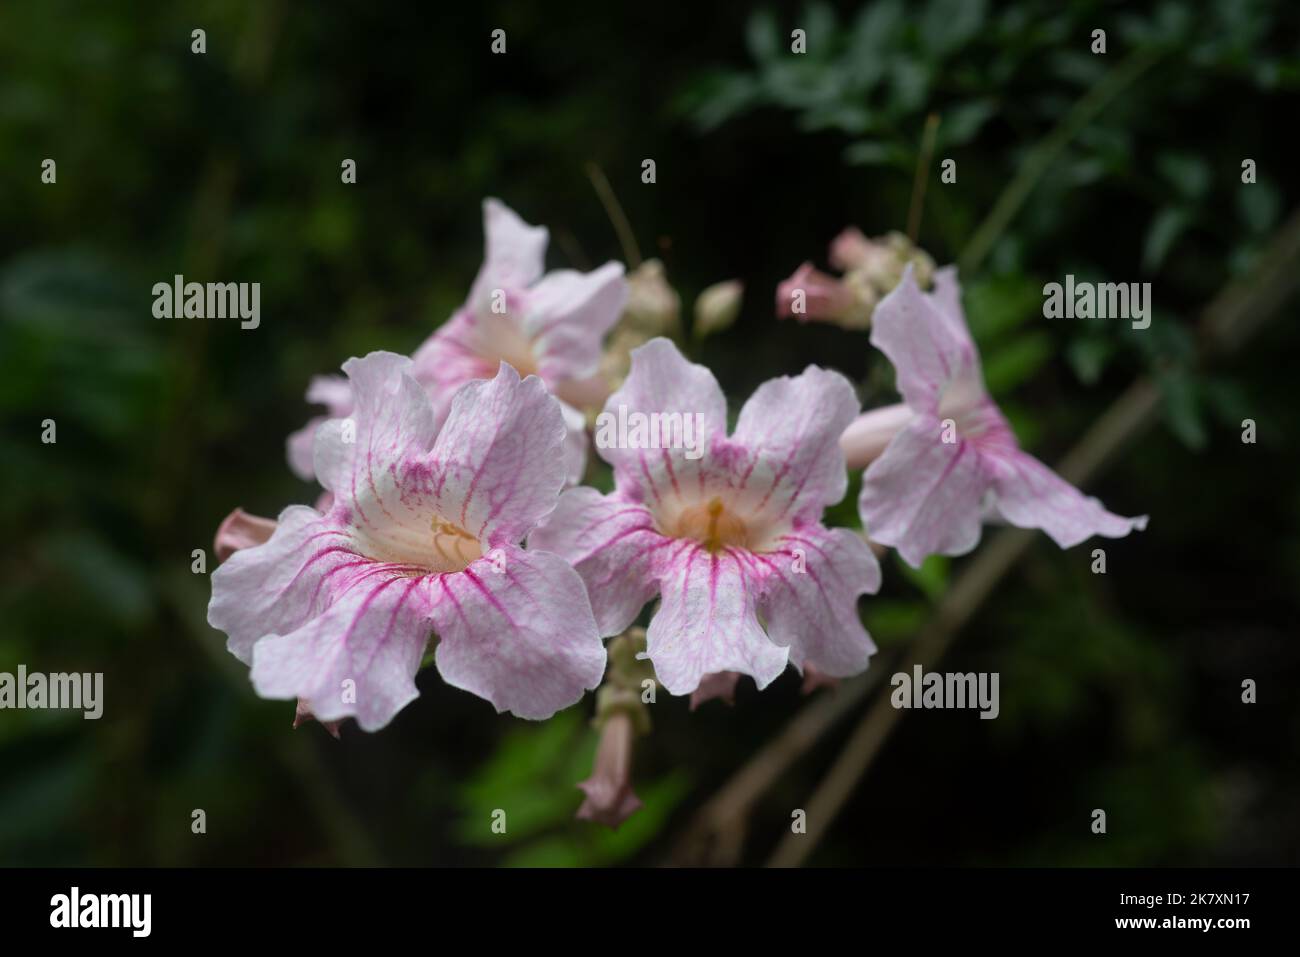 White flowers with pink veins of Queen of Sheba-vine or pink trumpet vine Stock Photo